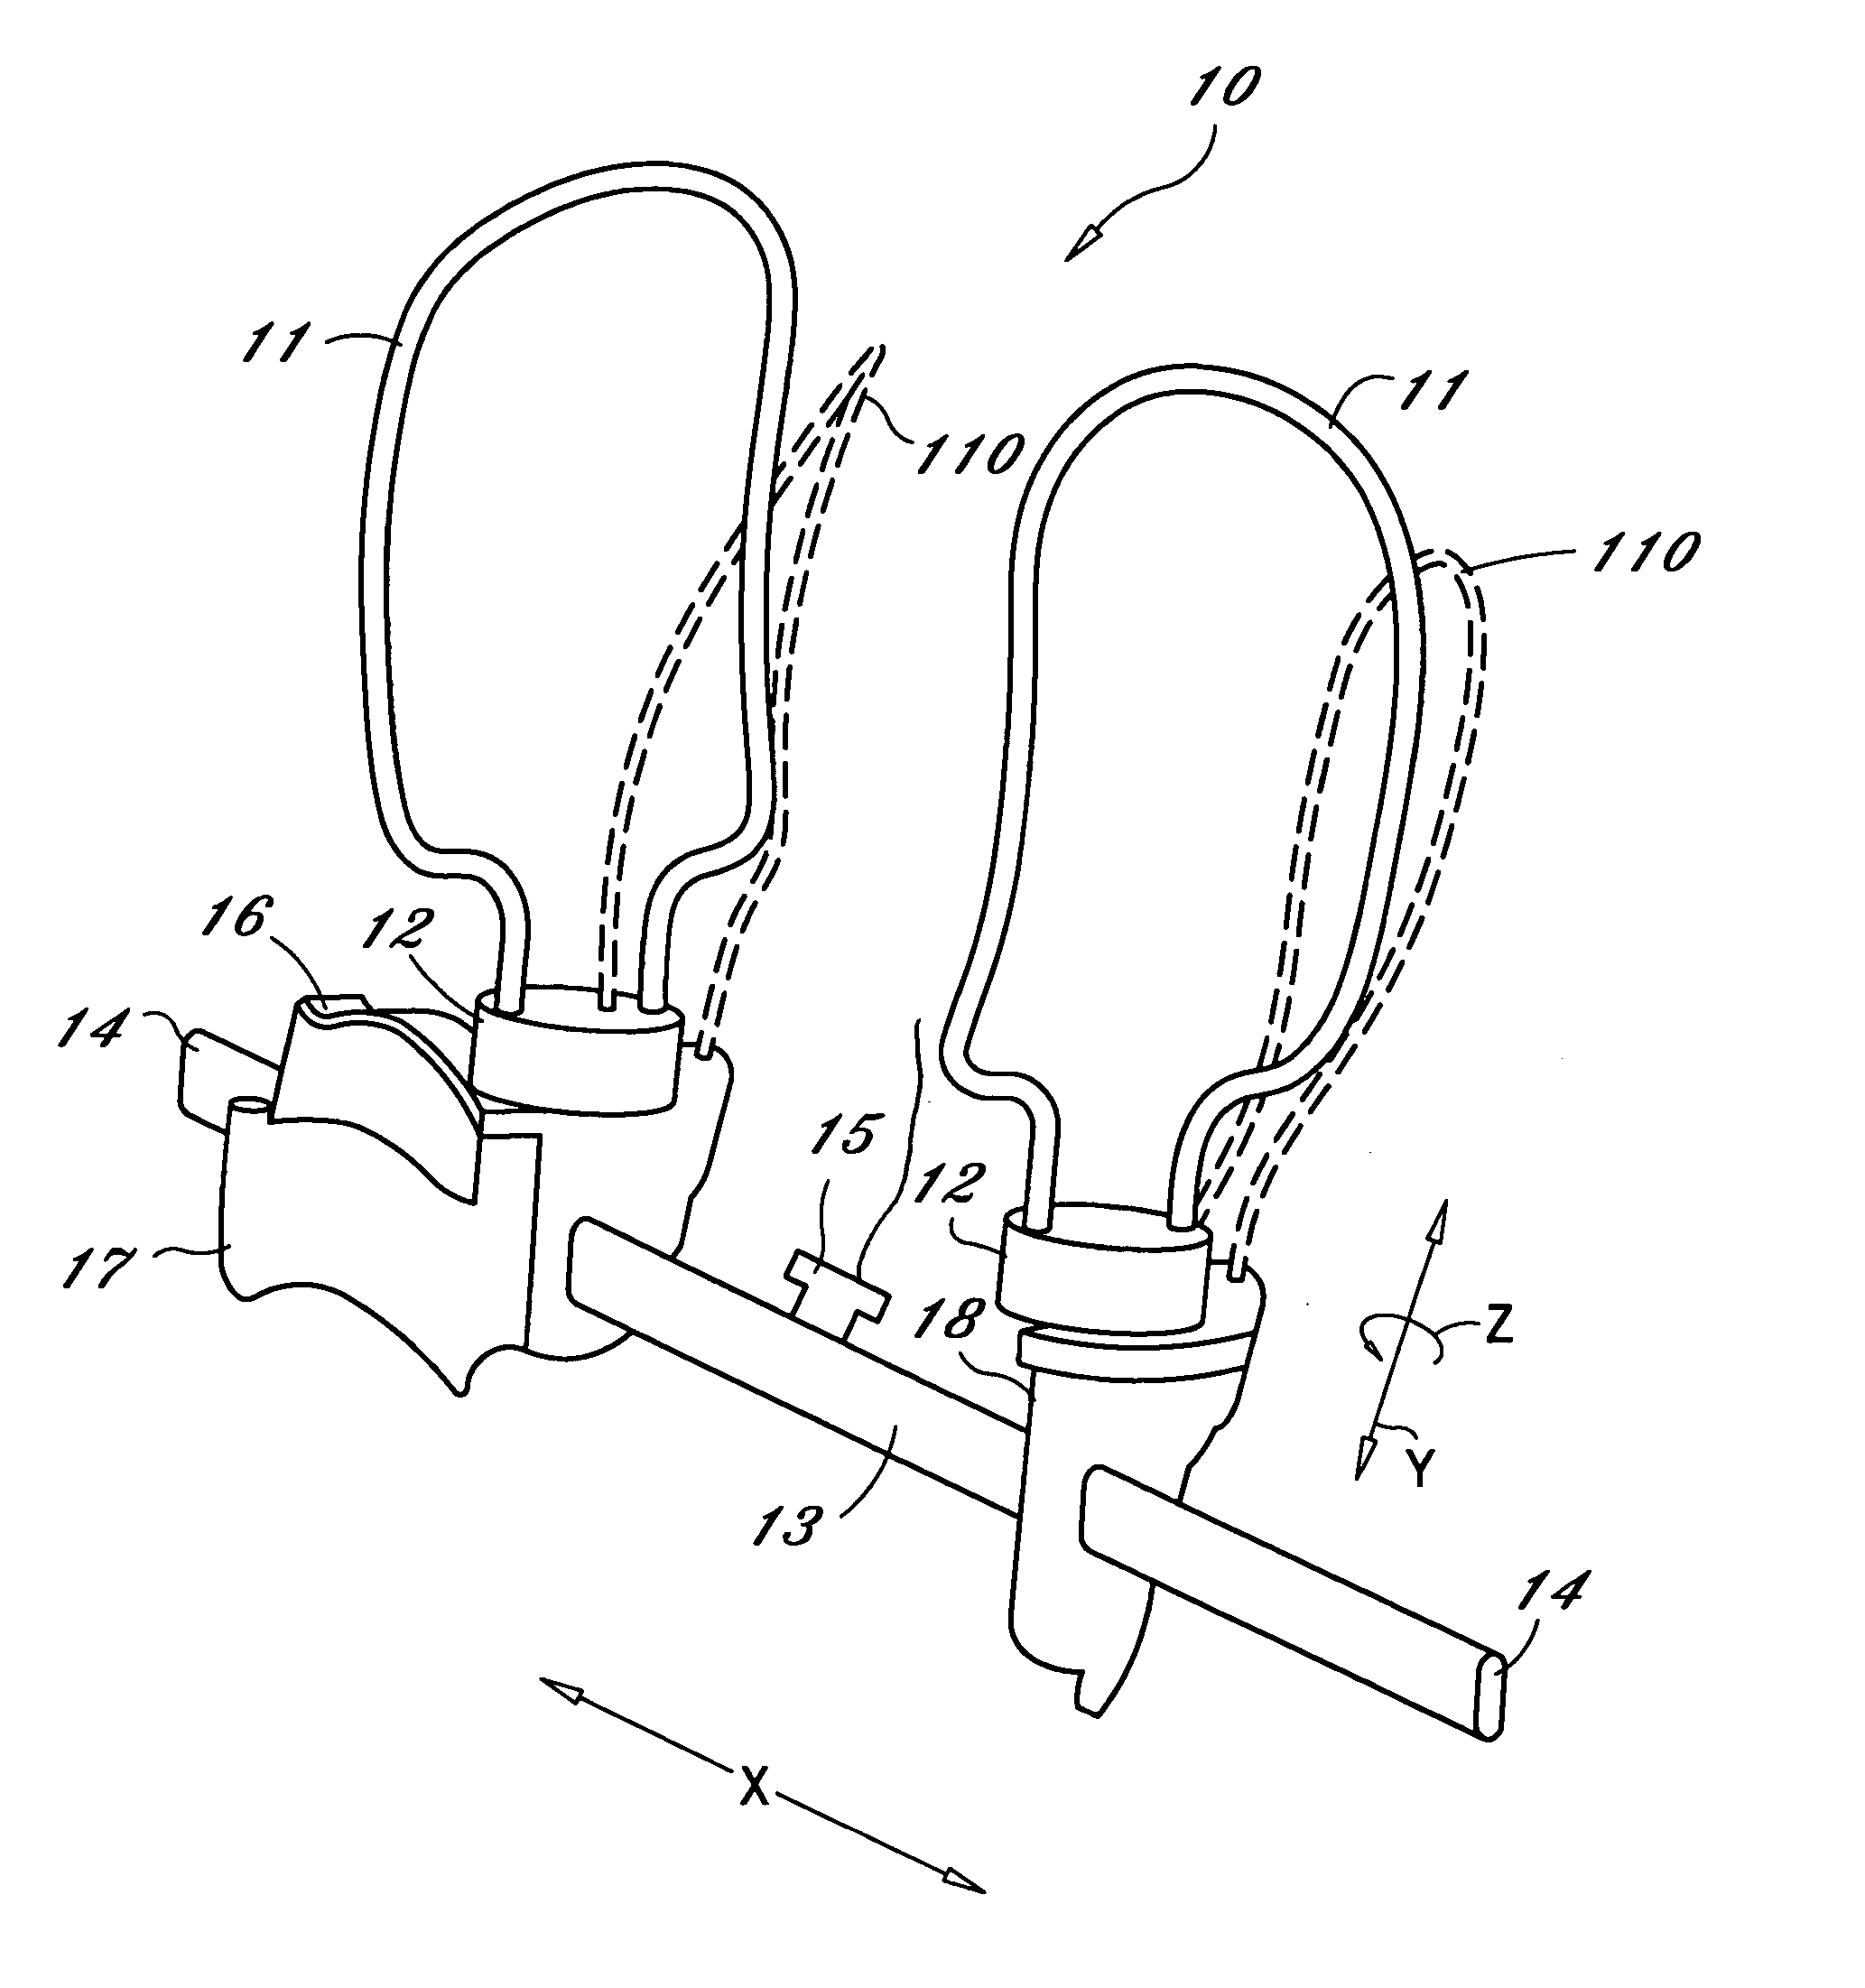 Pelvic waypoint clamp assembly and method